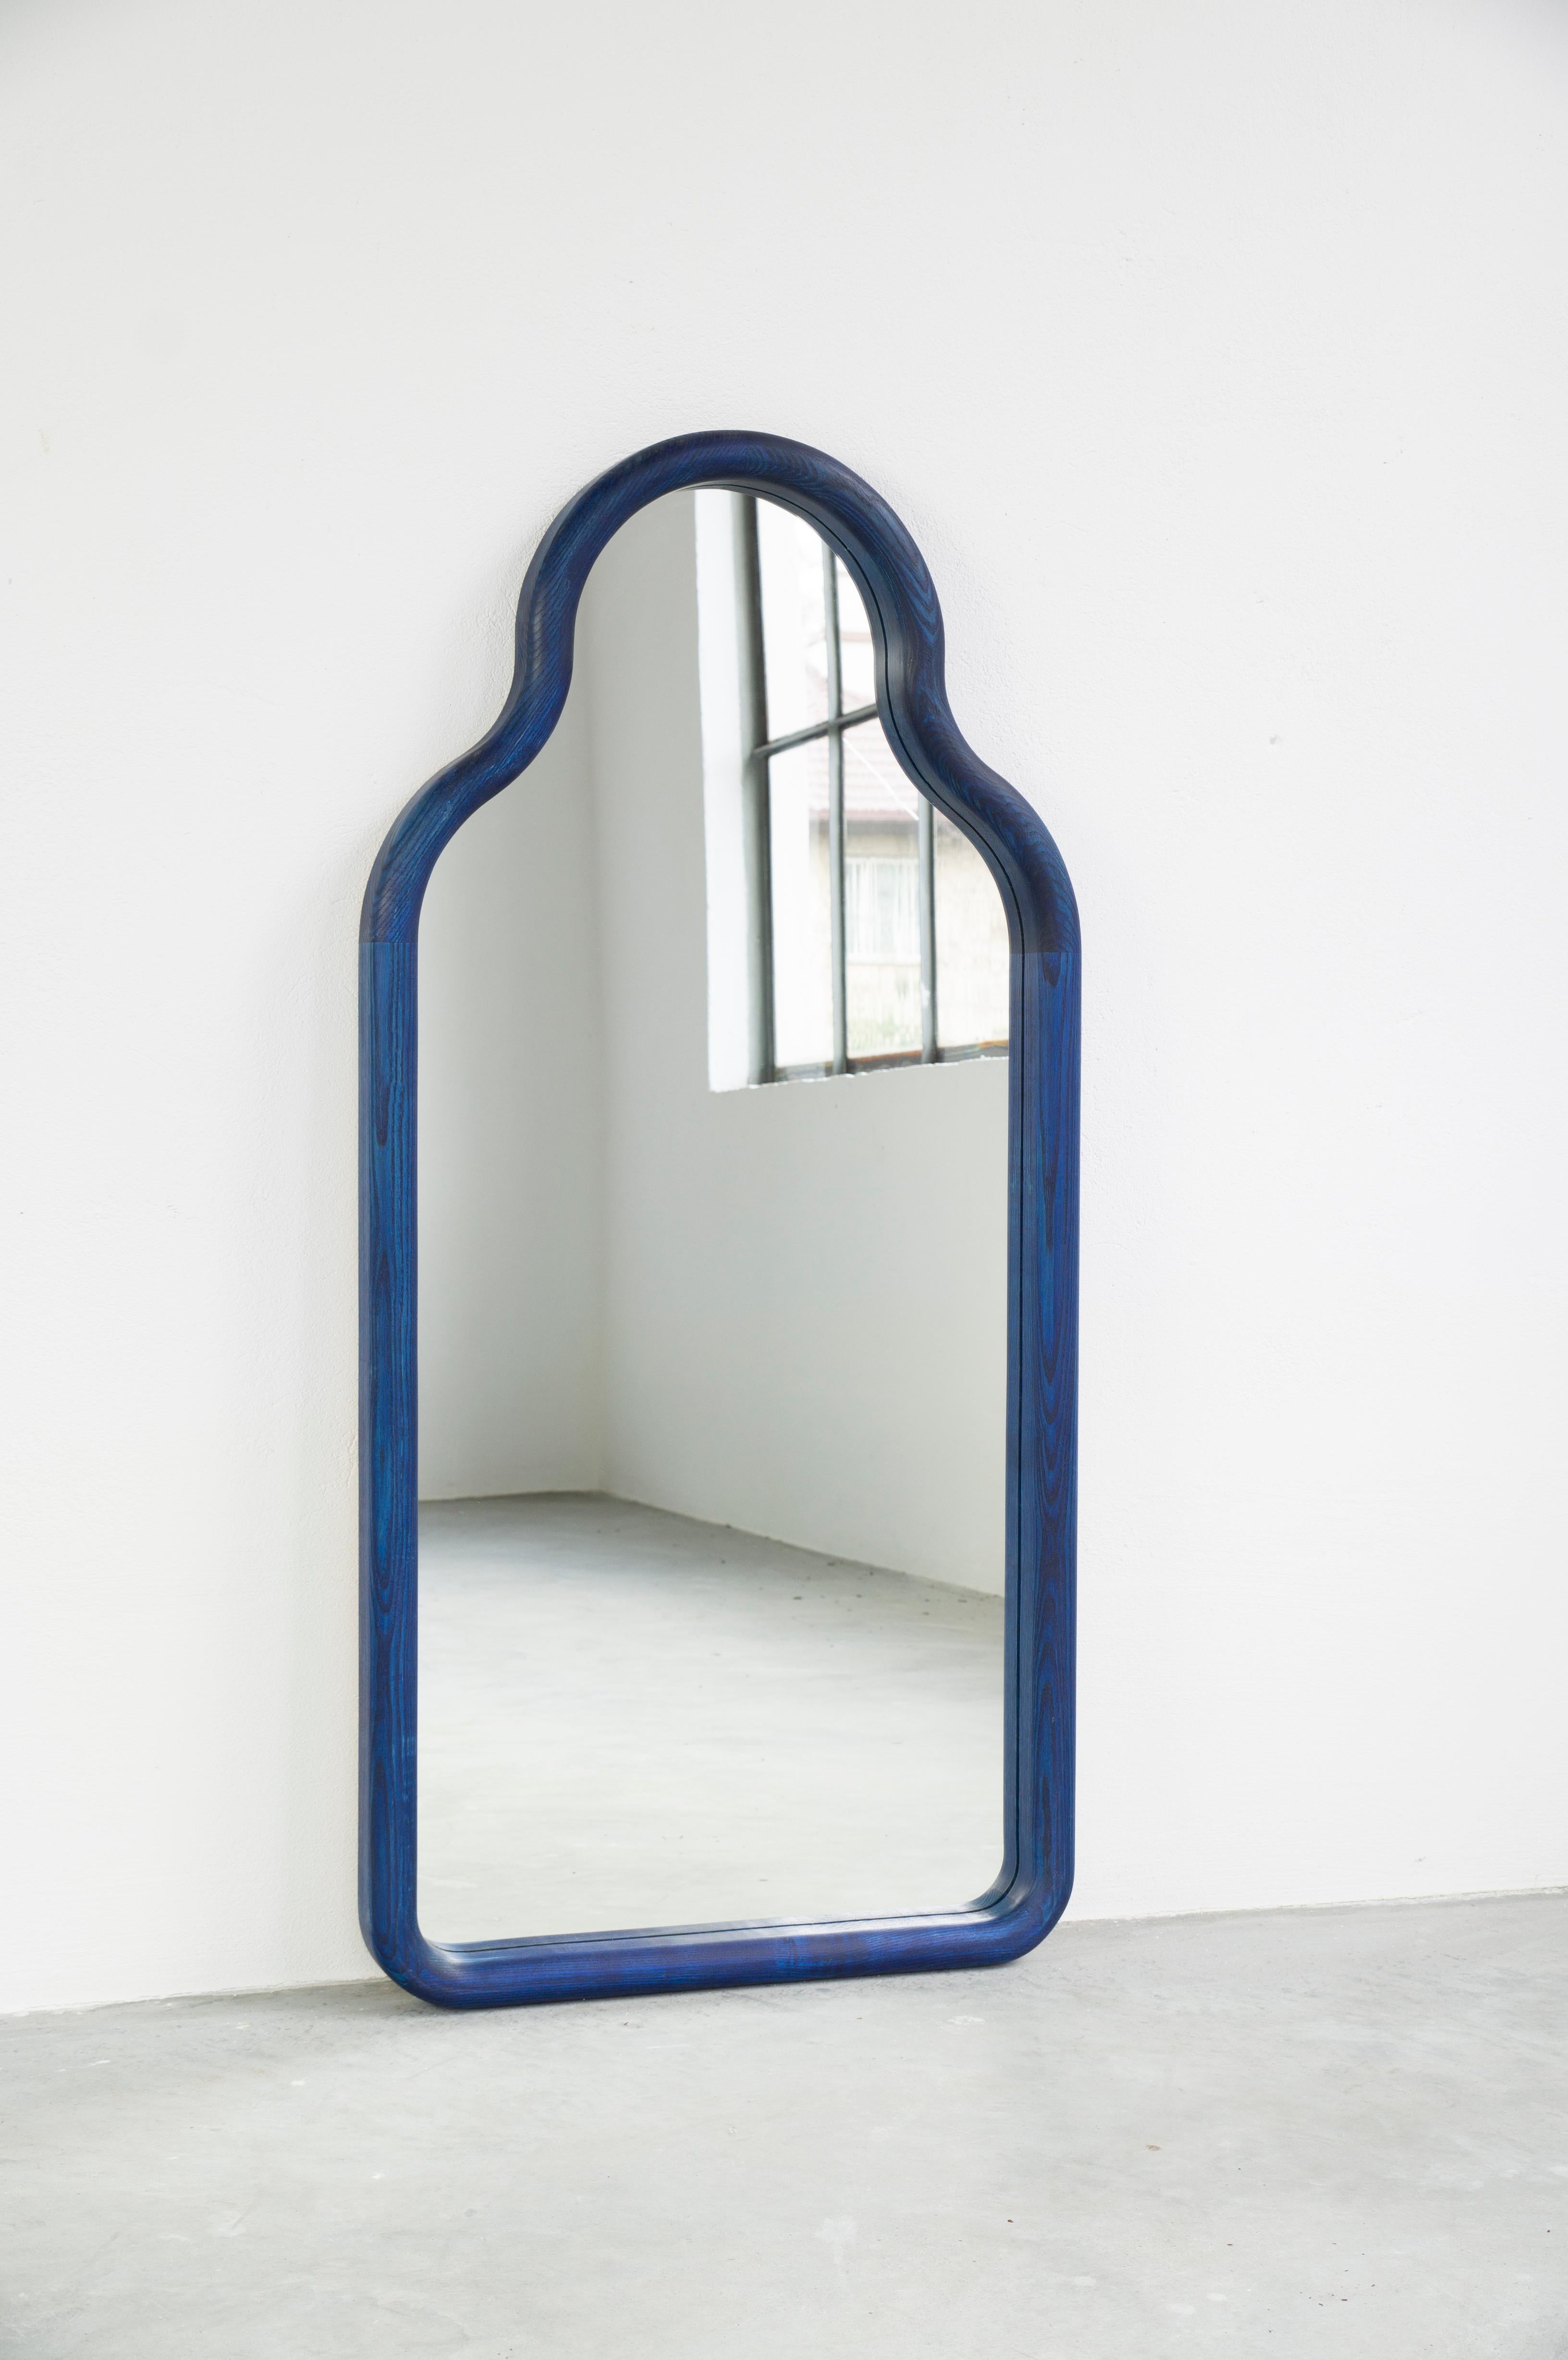 TRN M Floor mirror
Signed by Pani Jurek

Dimensions: H110 x 51.5 x 5
Materials: Solid ashwood, hand stained
Colors: red, blue, green, natural

_________________________________

Pani Jurek is a Polish design studio founded by artist and designer